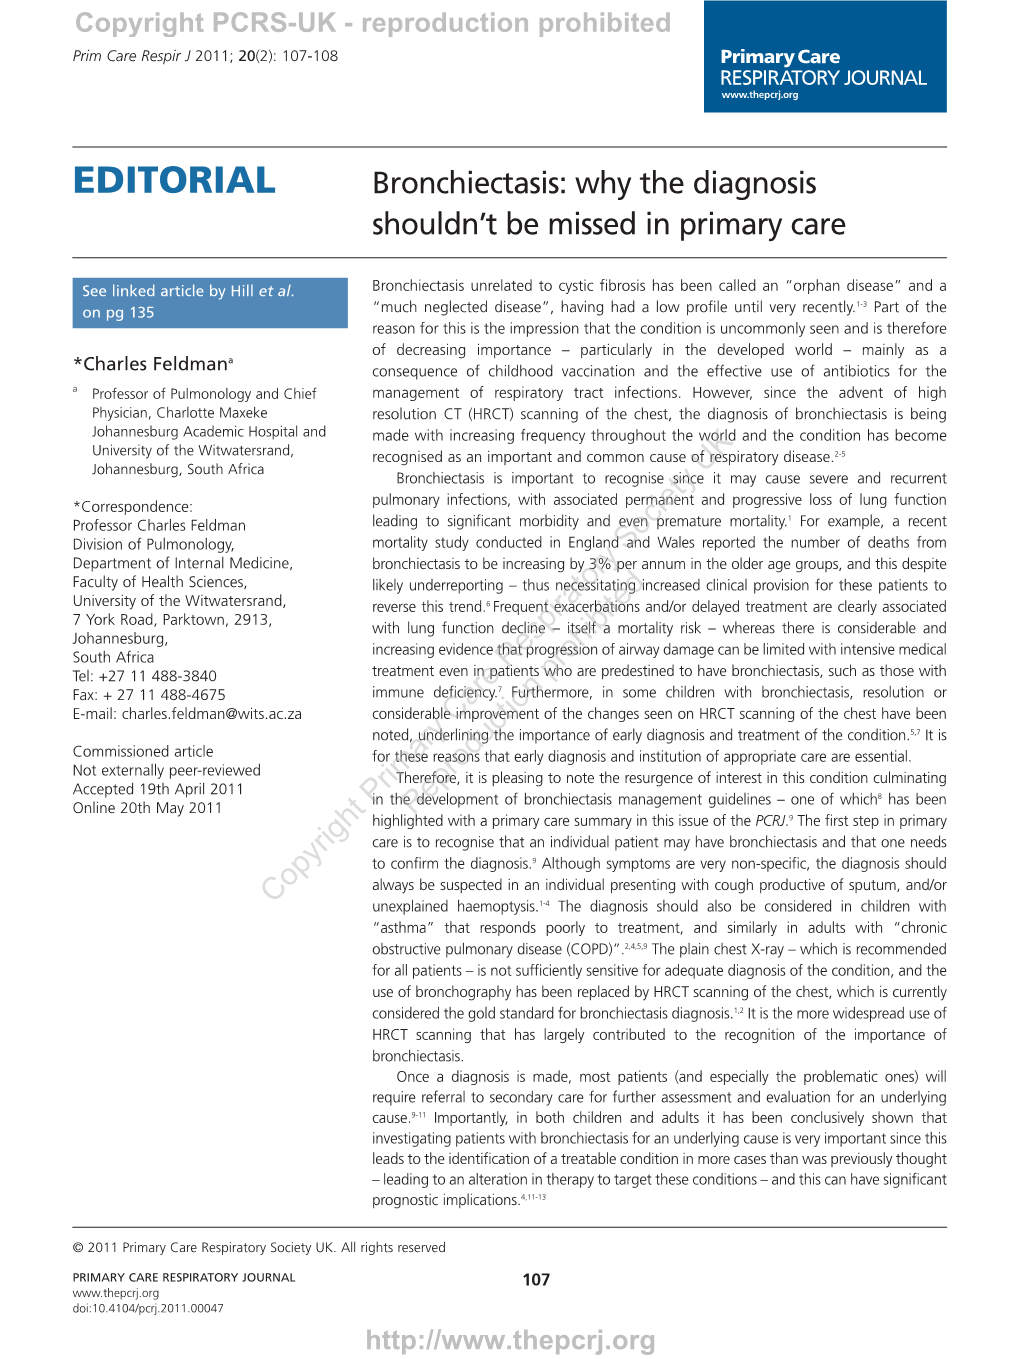 Bronchiectasis: Why the Diagnosis Shouldn’T Be Missed in Primary Care